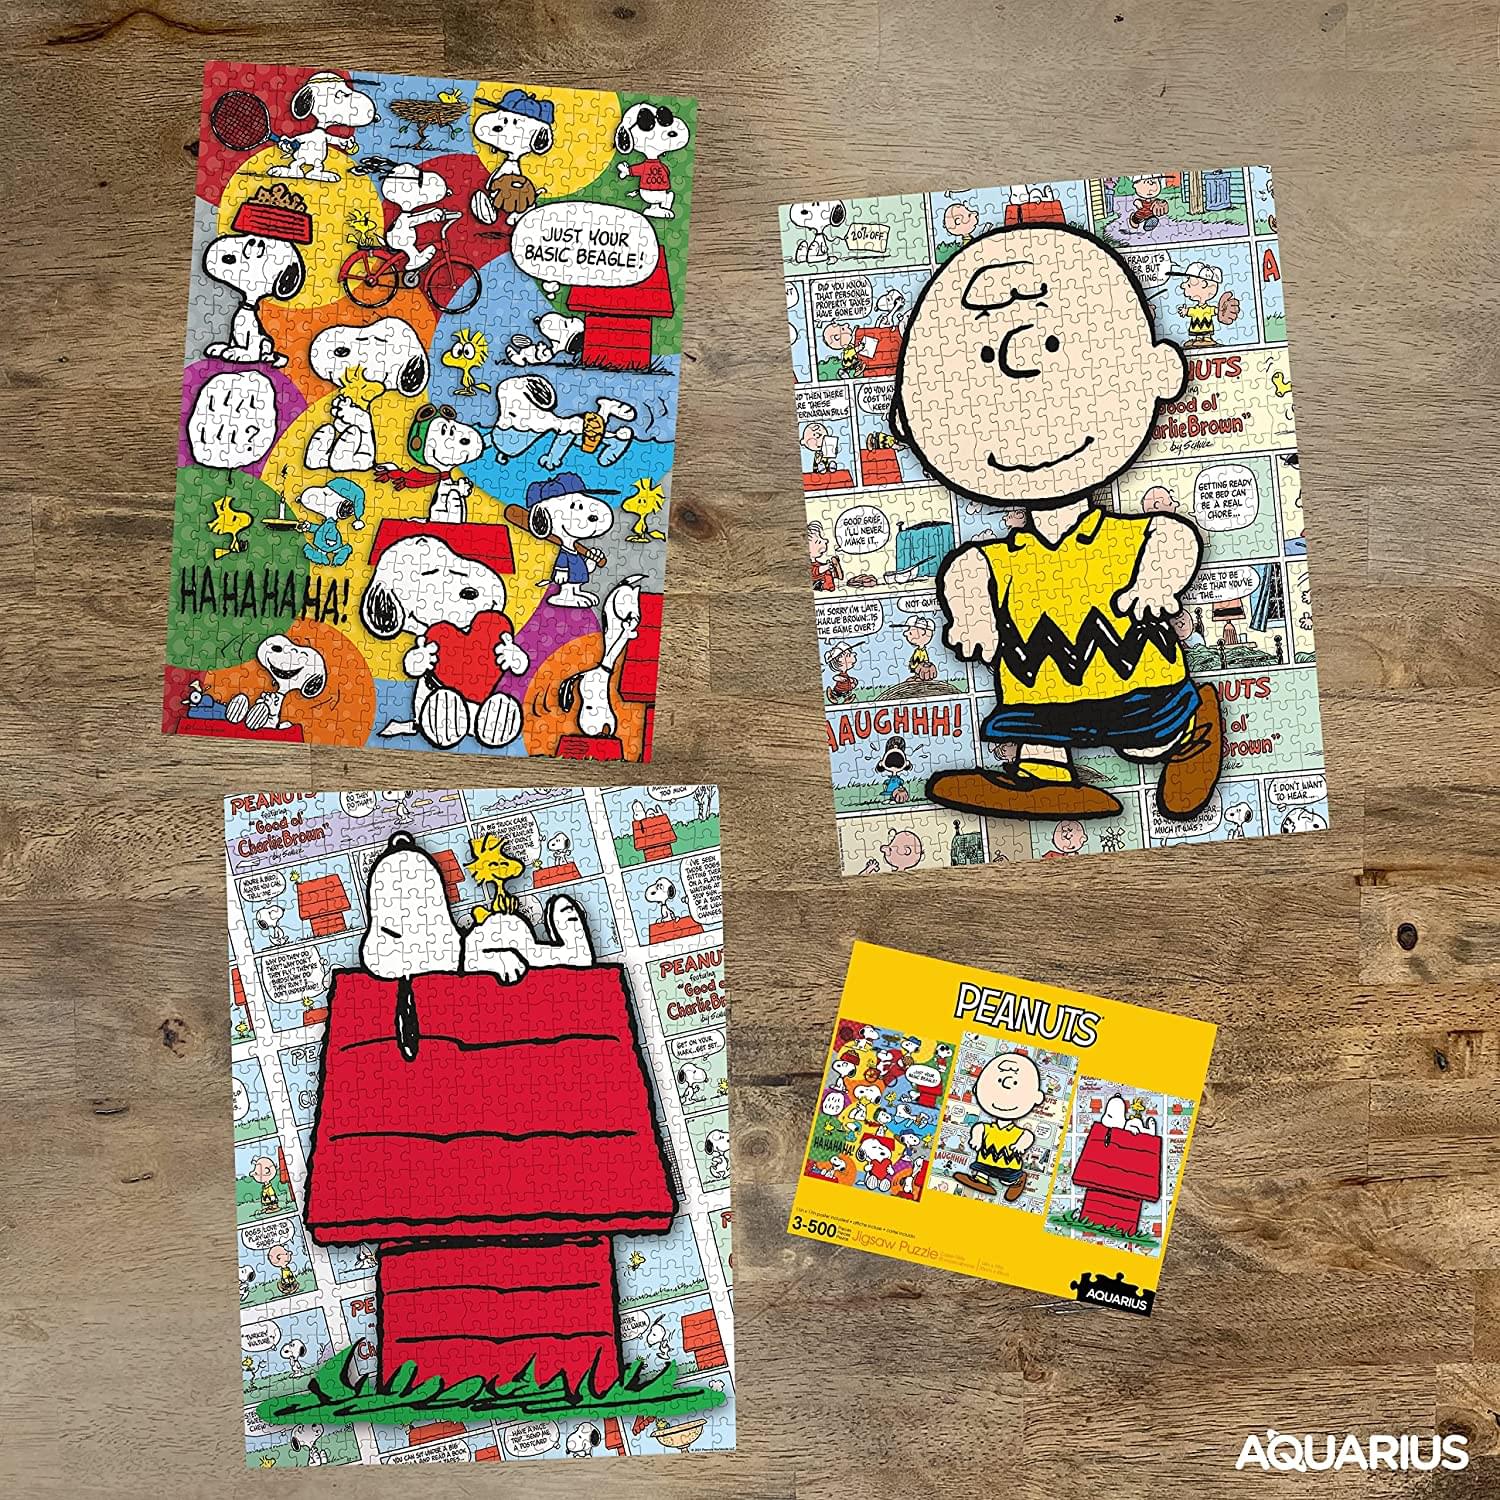 Peanuts 500 Piece Jigsaw Puzzle 3-Pack